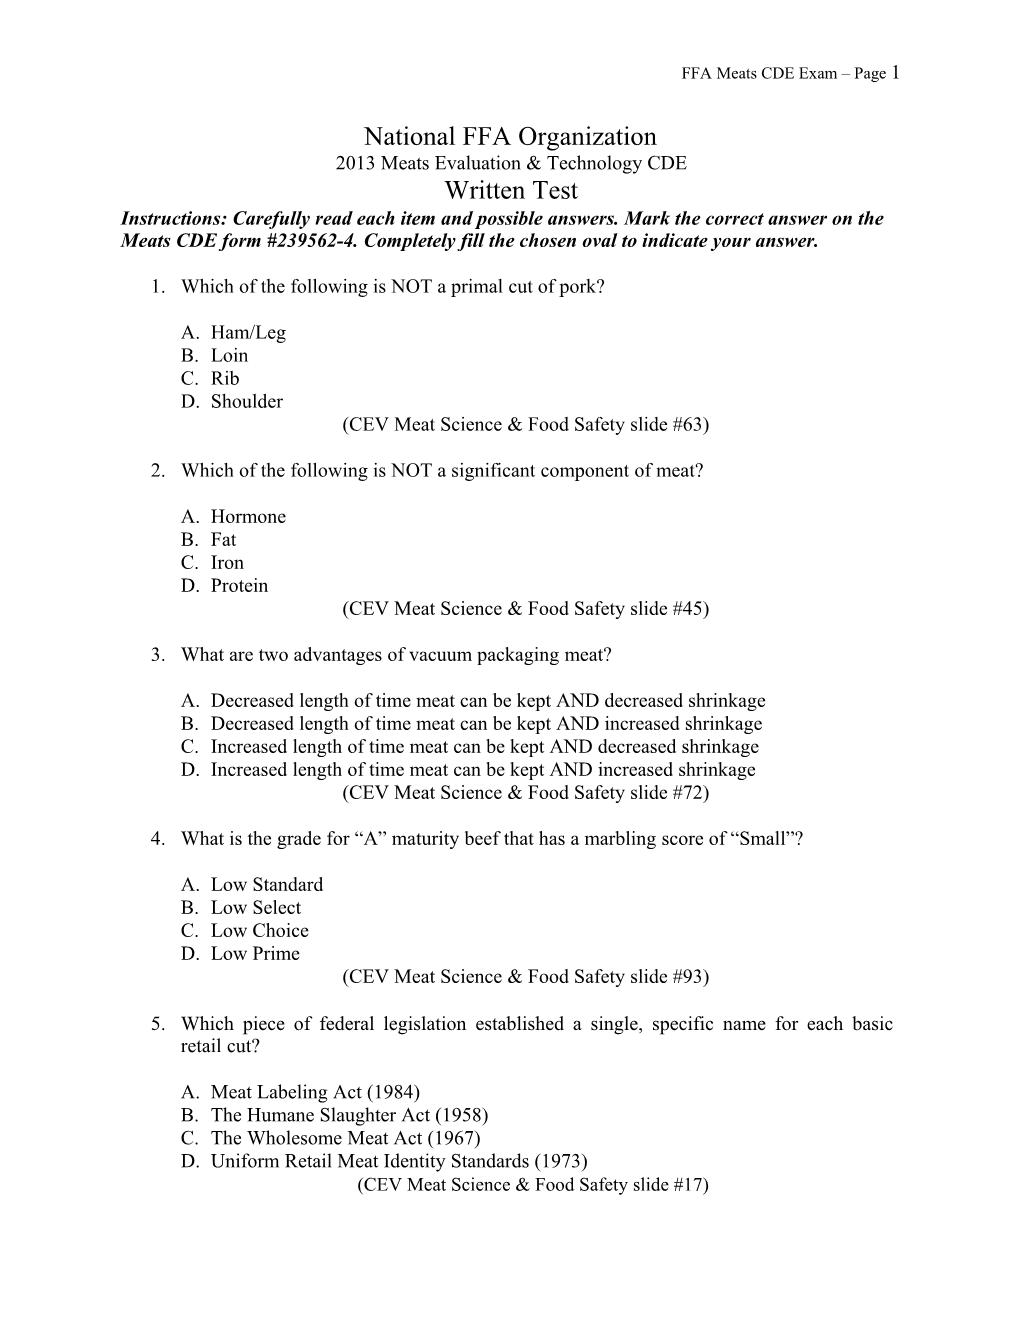 FFA Meats CDE Exam Page 1 s1